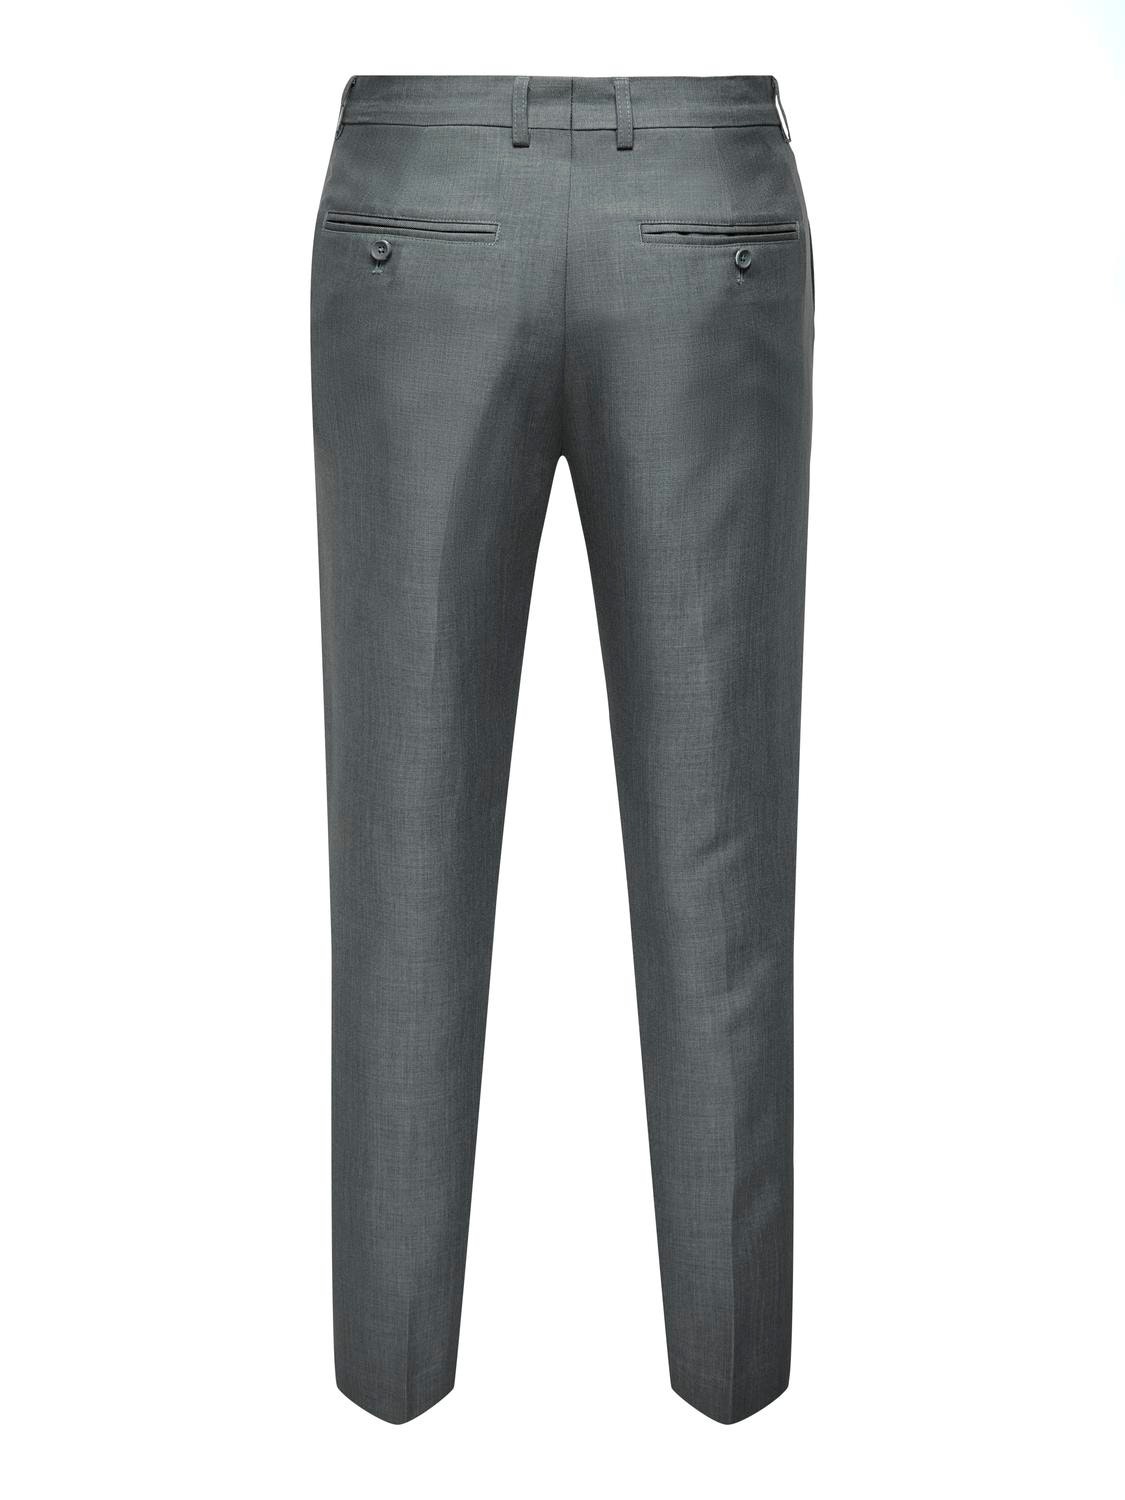 ONLY & SONS Slim Fit Tailored Trousers -Medium Grey Melange - 22026243